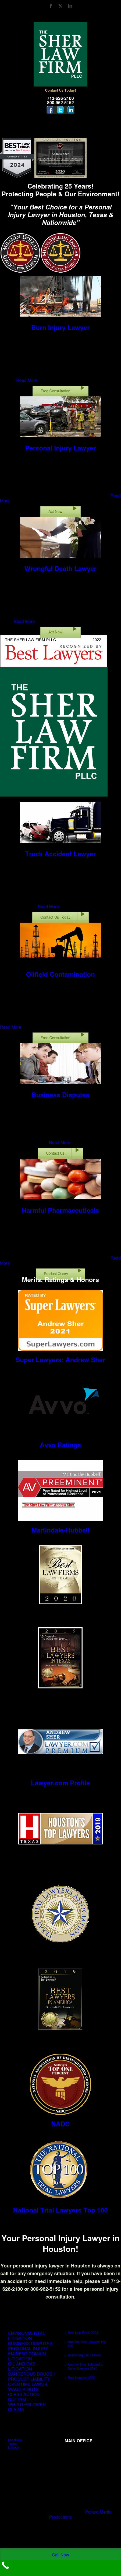 The Sher Law Firm, PLLC - Dallas TX Lawyers